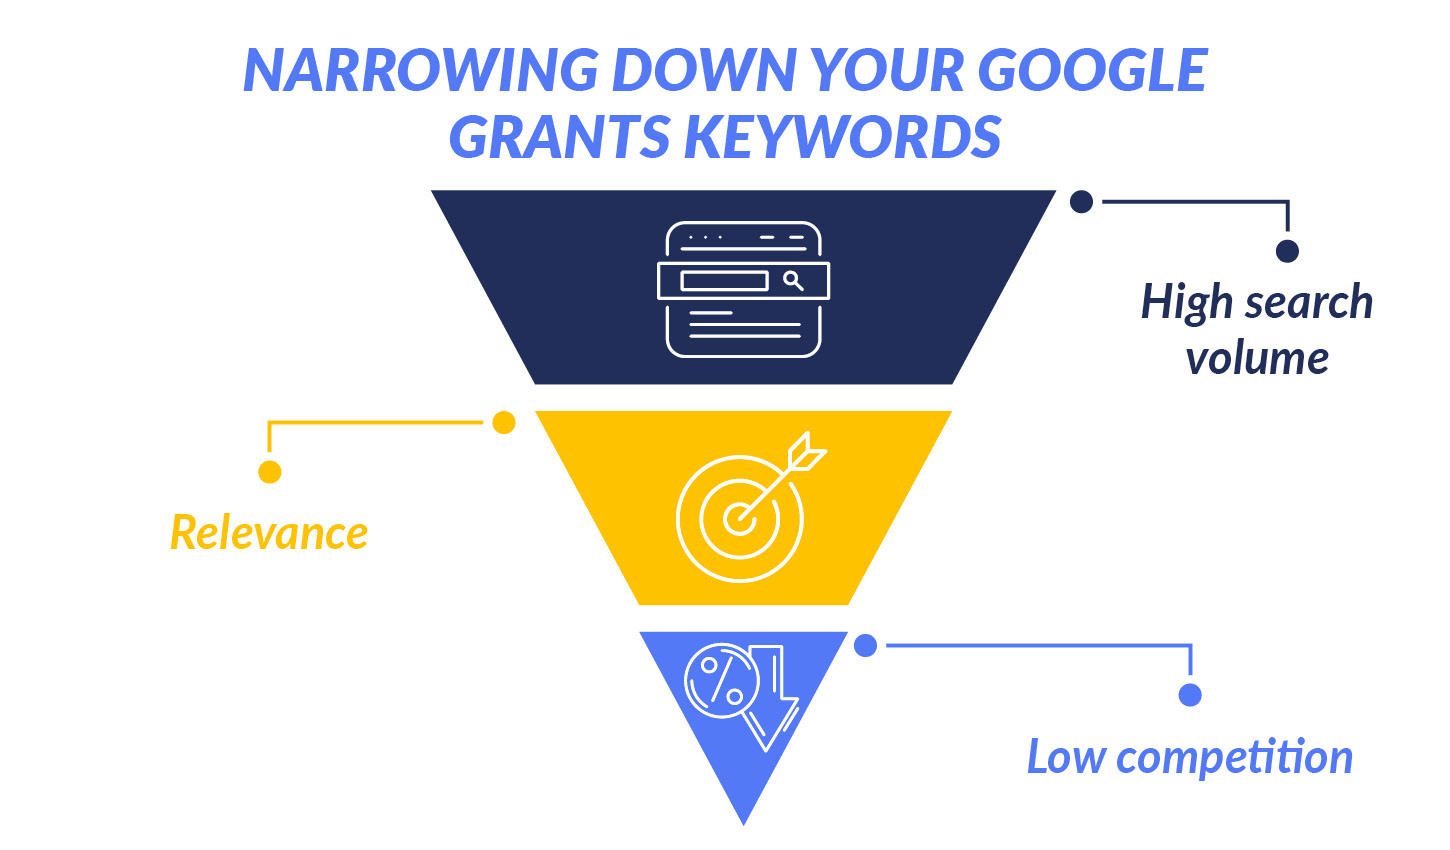 This graphic shows how keywords can be narrowed down for a nonprofit’s Google Ad campaign.